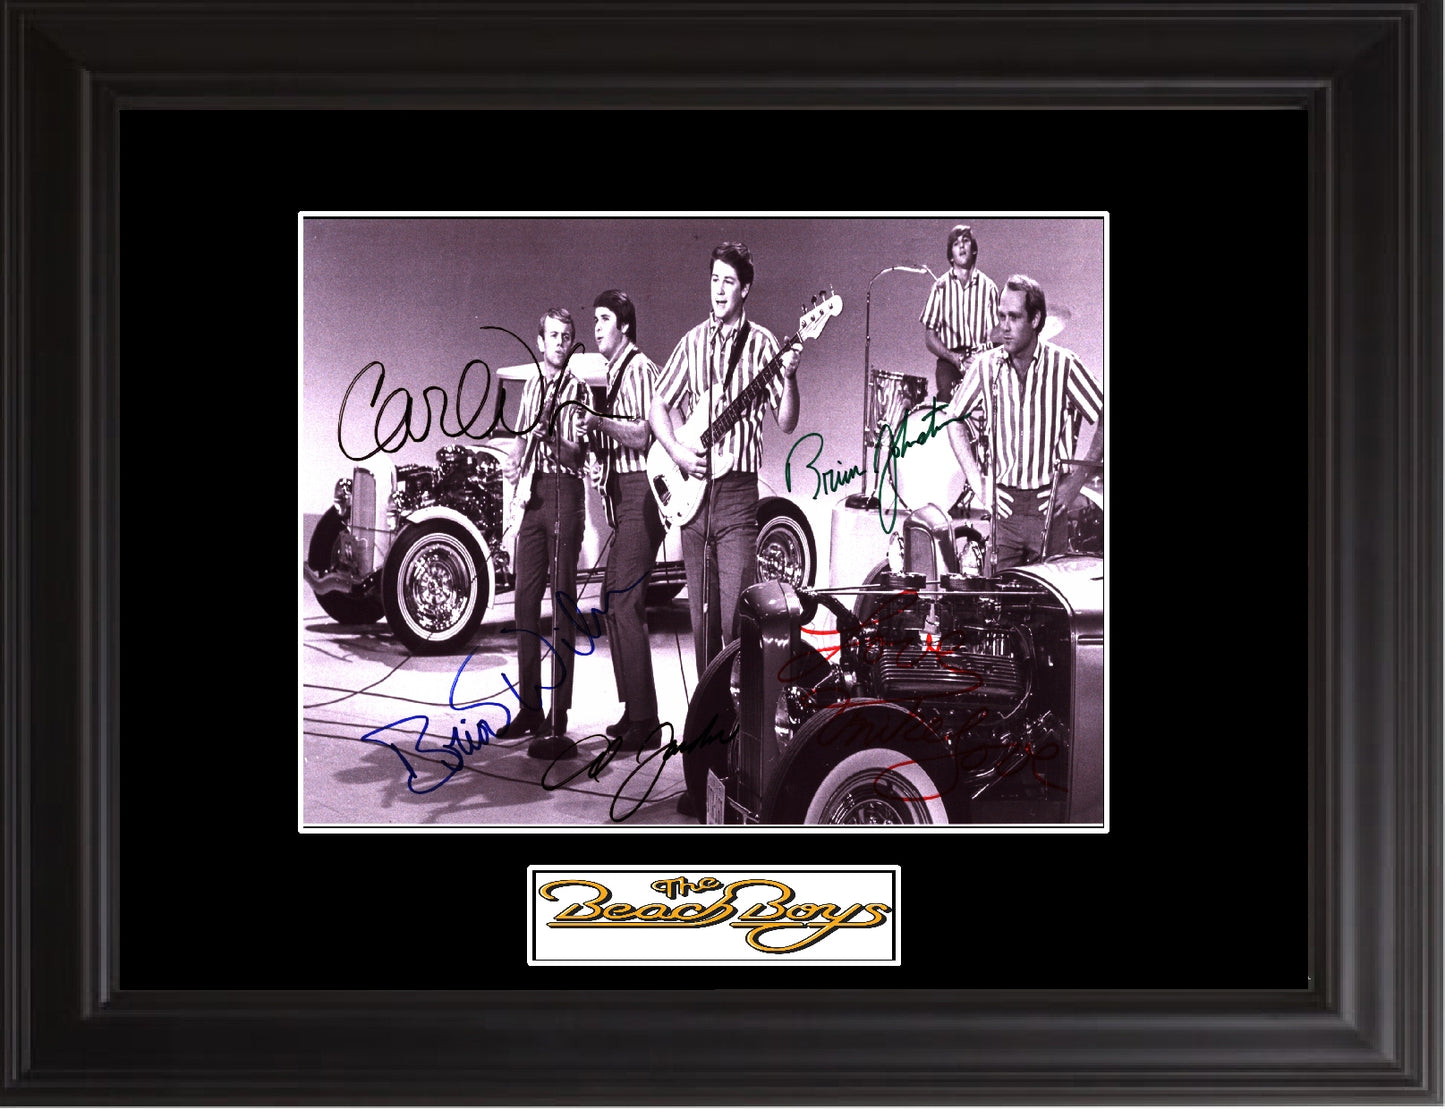 Beach Boys Autographed Photo - Zion Graphic Collectibles